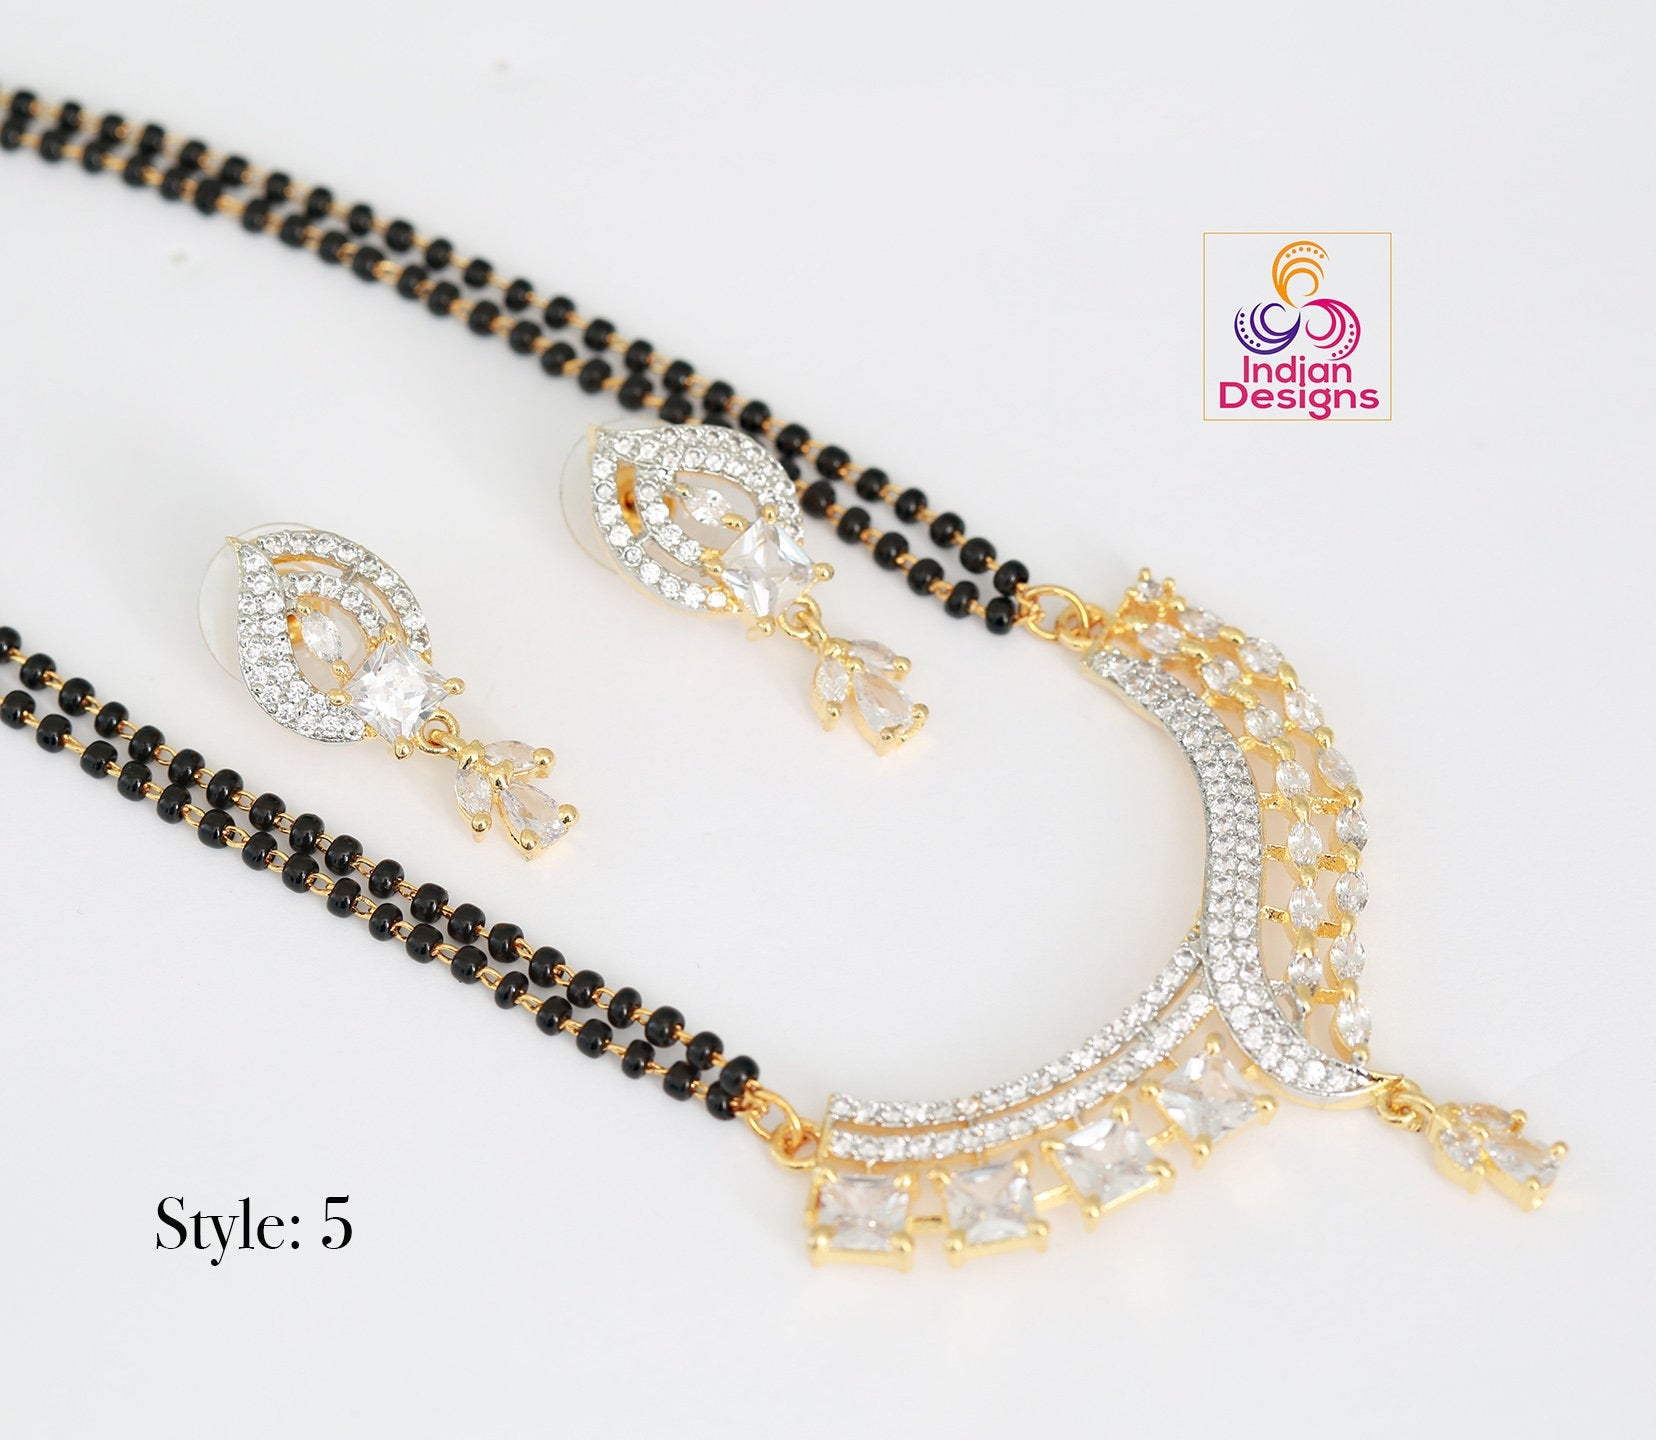 CZ Gold Plated MangalSutra with black bead chain |Indian Fashion Jewelry |Daily wear American Diamond MangalSutra set |Perfect Gift for wife